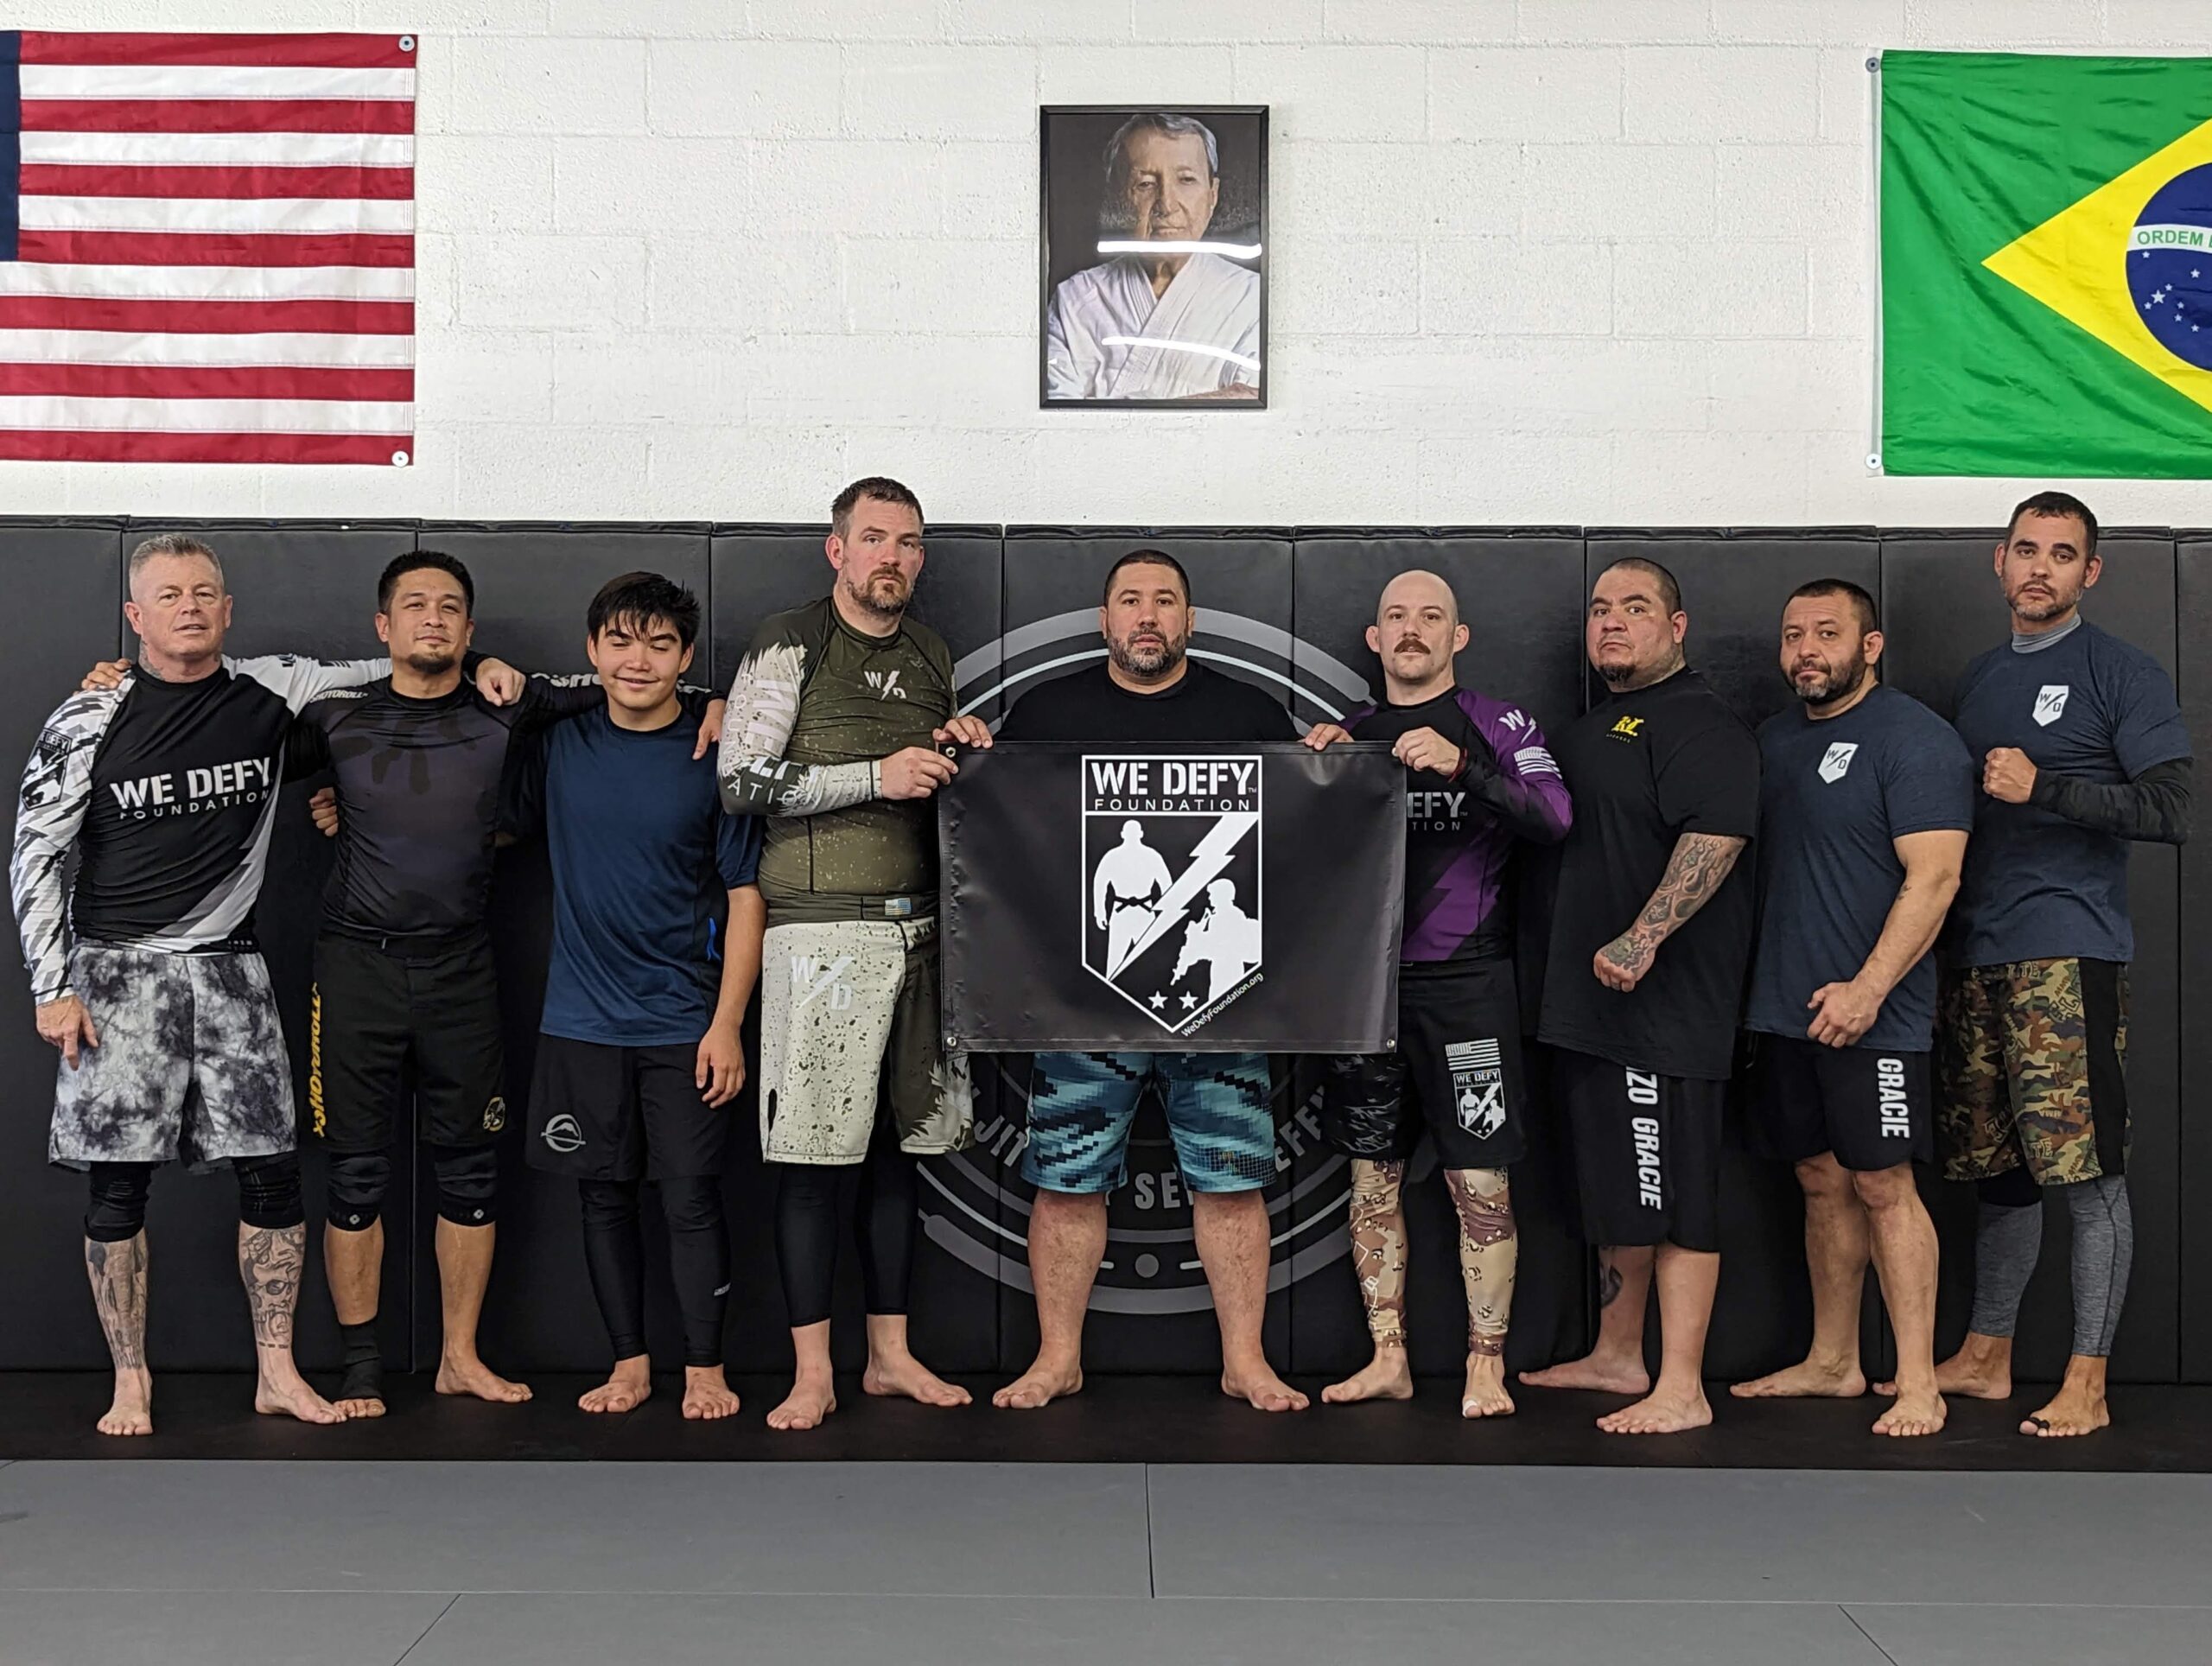 The Unlimited Jiu Jitsu team poses for a photo at the annual We Defy Foundation Ruck Roll, 2022 holding the We Defy Foundation banner.